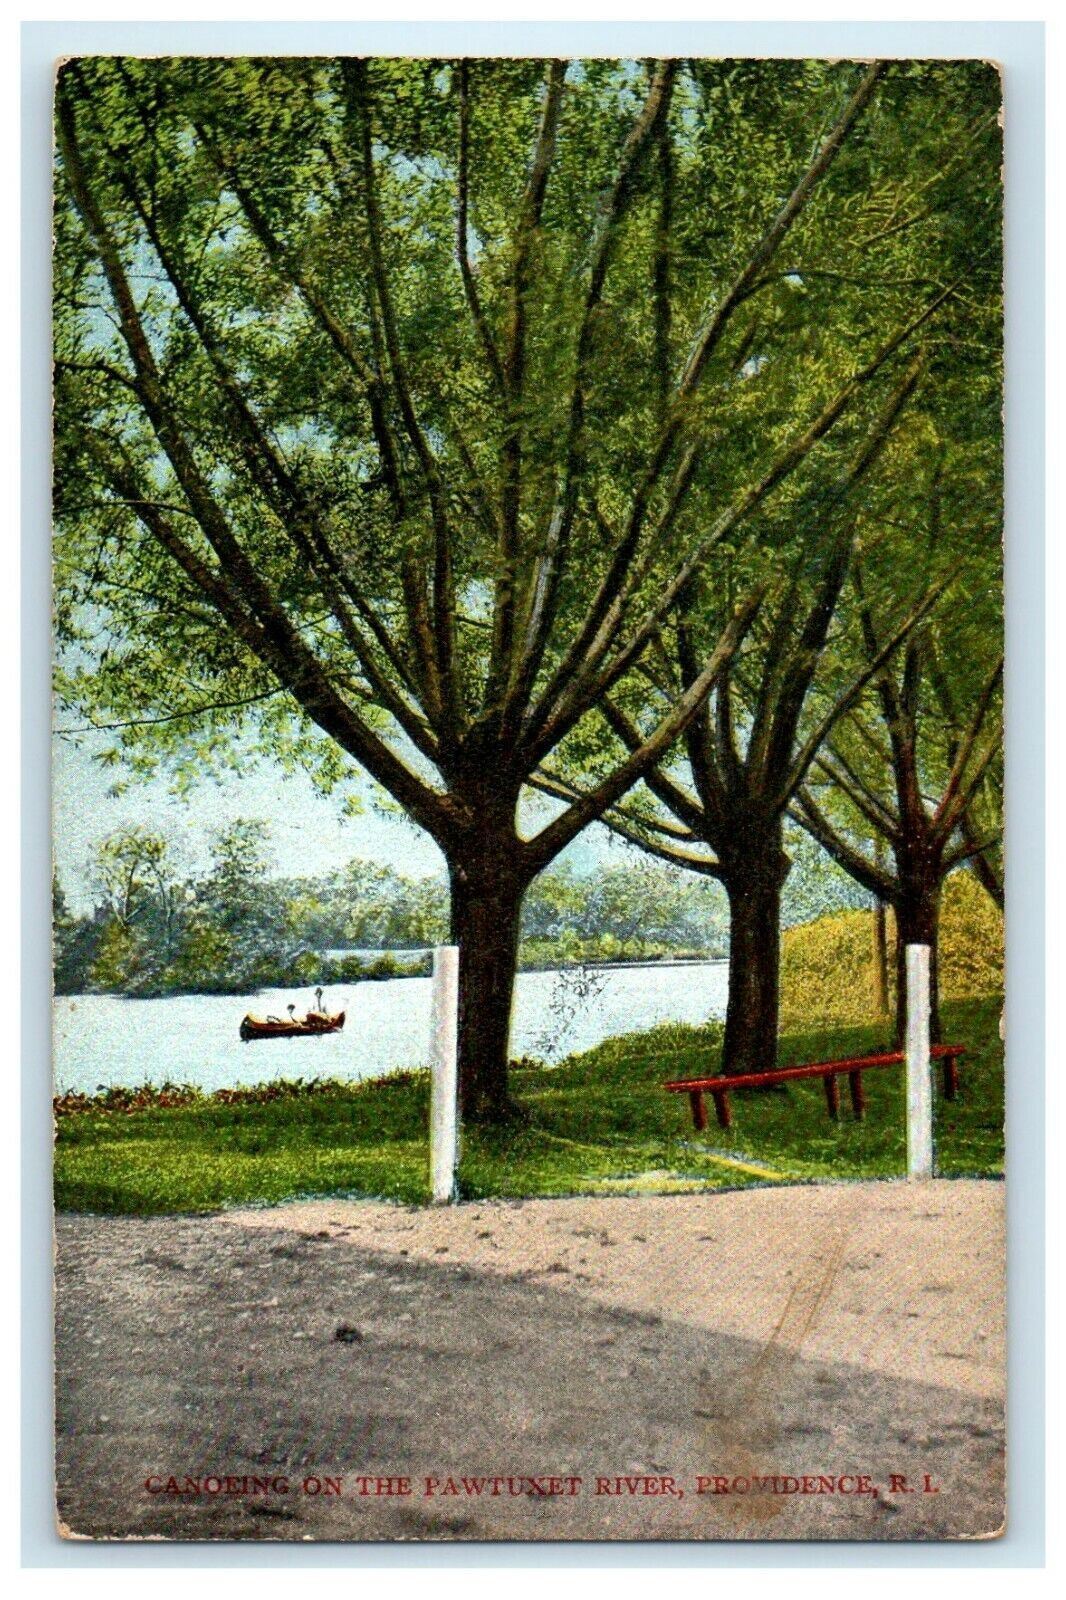 1909 Canoeing On The Pawtuxet River Providence Rhode Island RI Antique Postcard